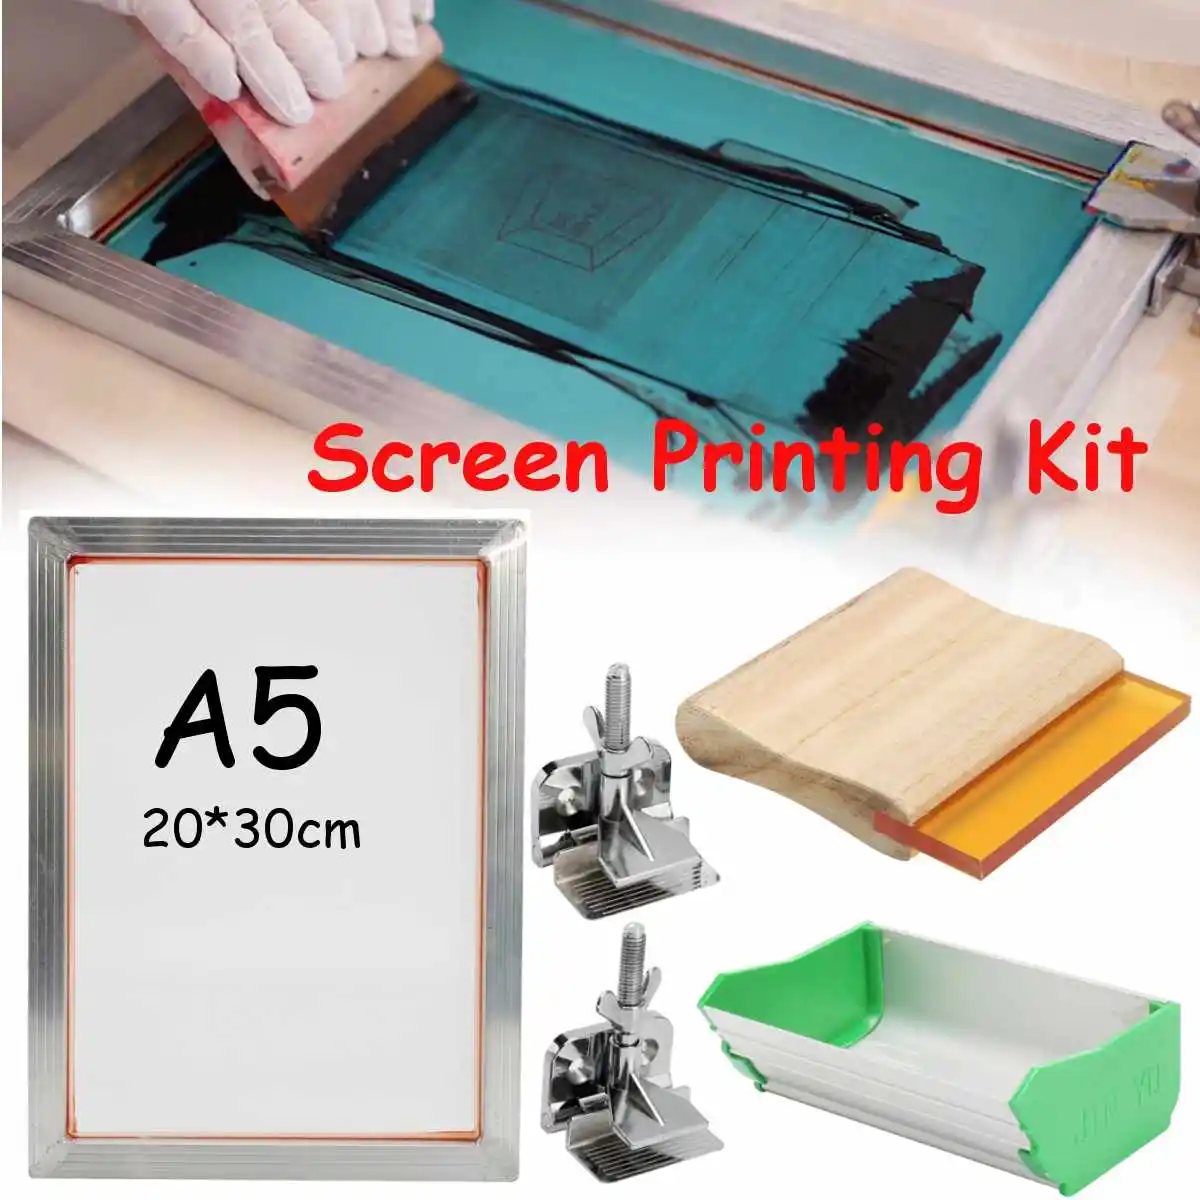 

A5 Screen Printing Kit Aluminum Frame Stretched, Polyester Fiber Mesh, Hinge Clamp, Emulsion Scoop Coater, Squeegee Board Set